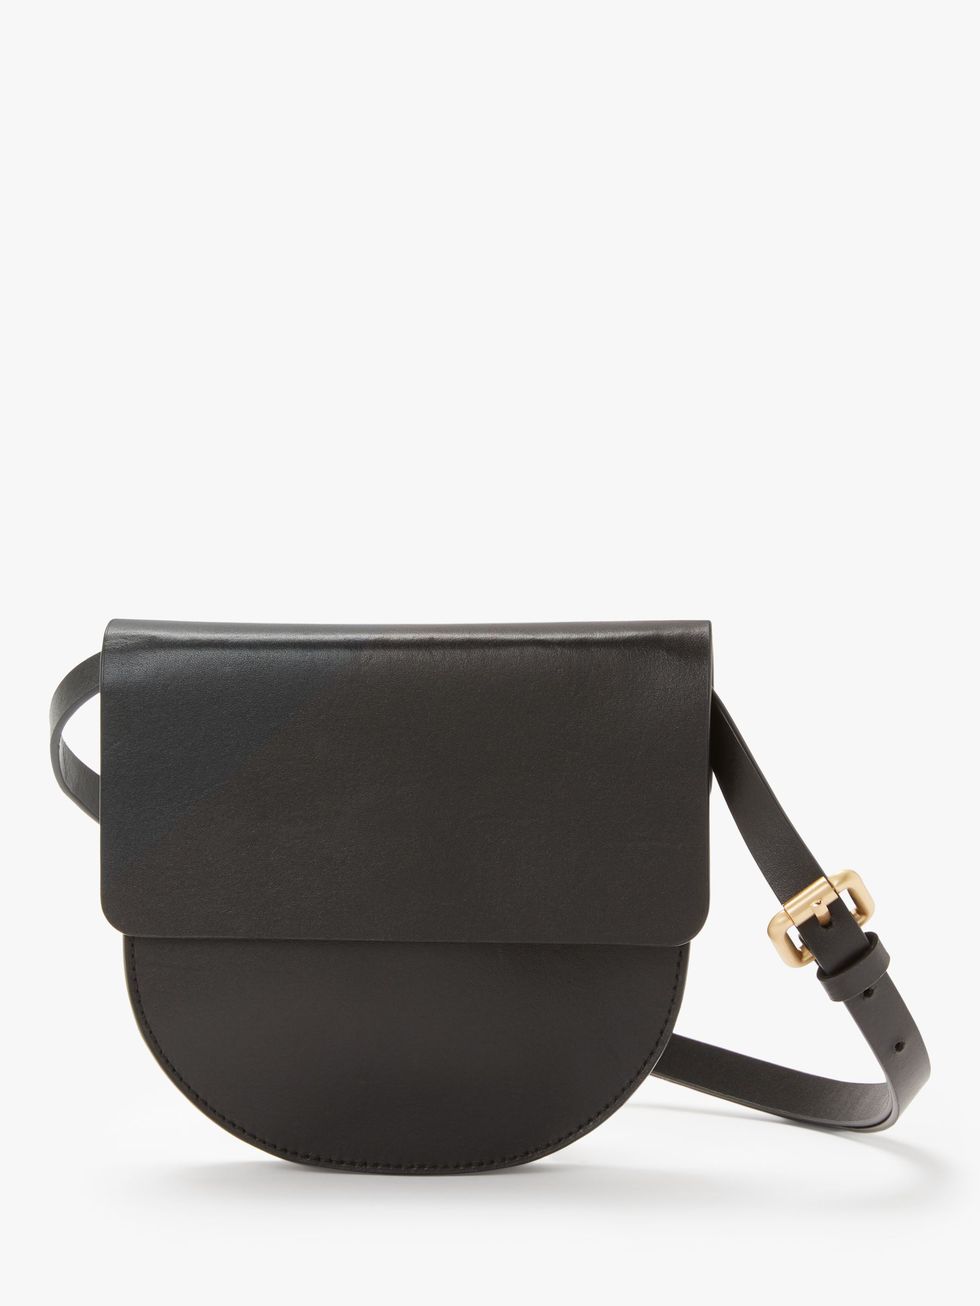 John Lewis & Partners is selling the perfect £40 cross-body bag